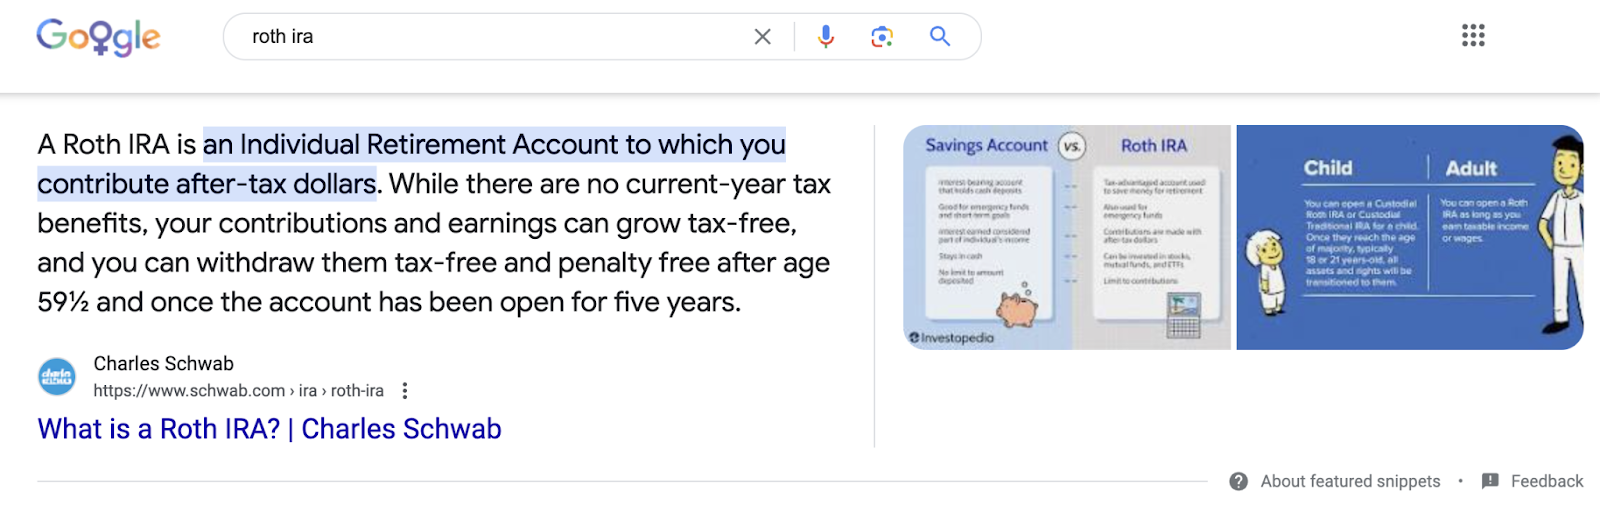 Charles Schwab’s landing leafage   connected  IRAs connected  Google SERP